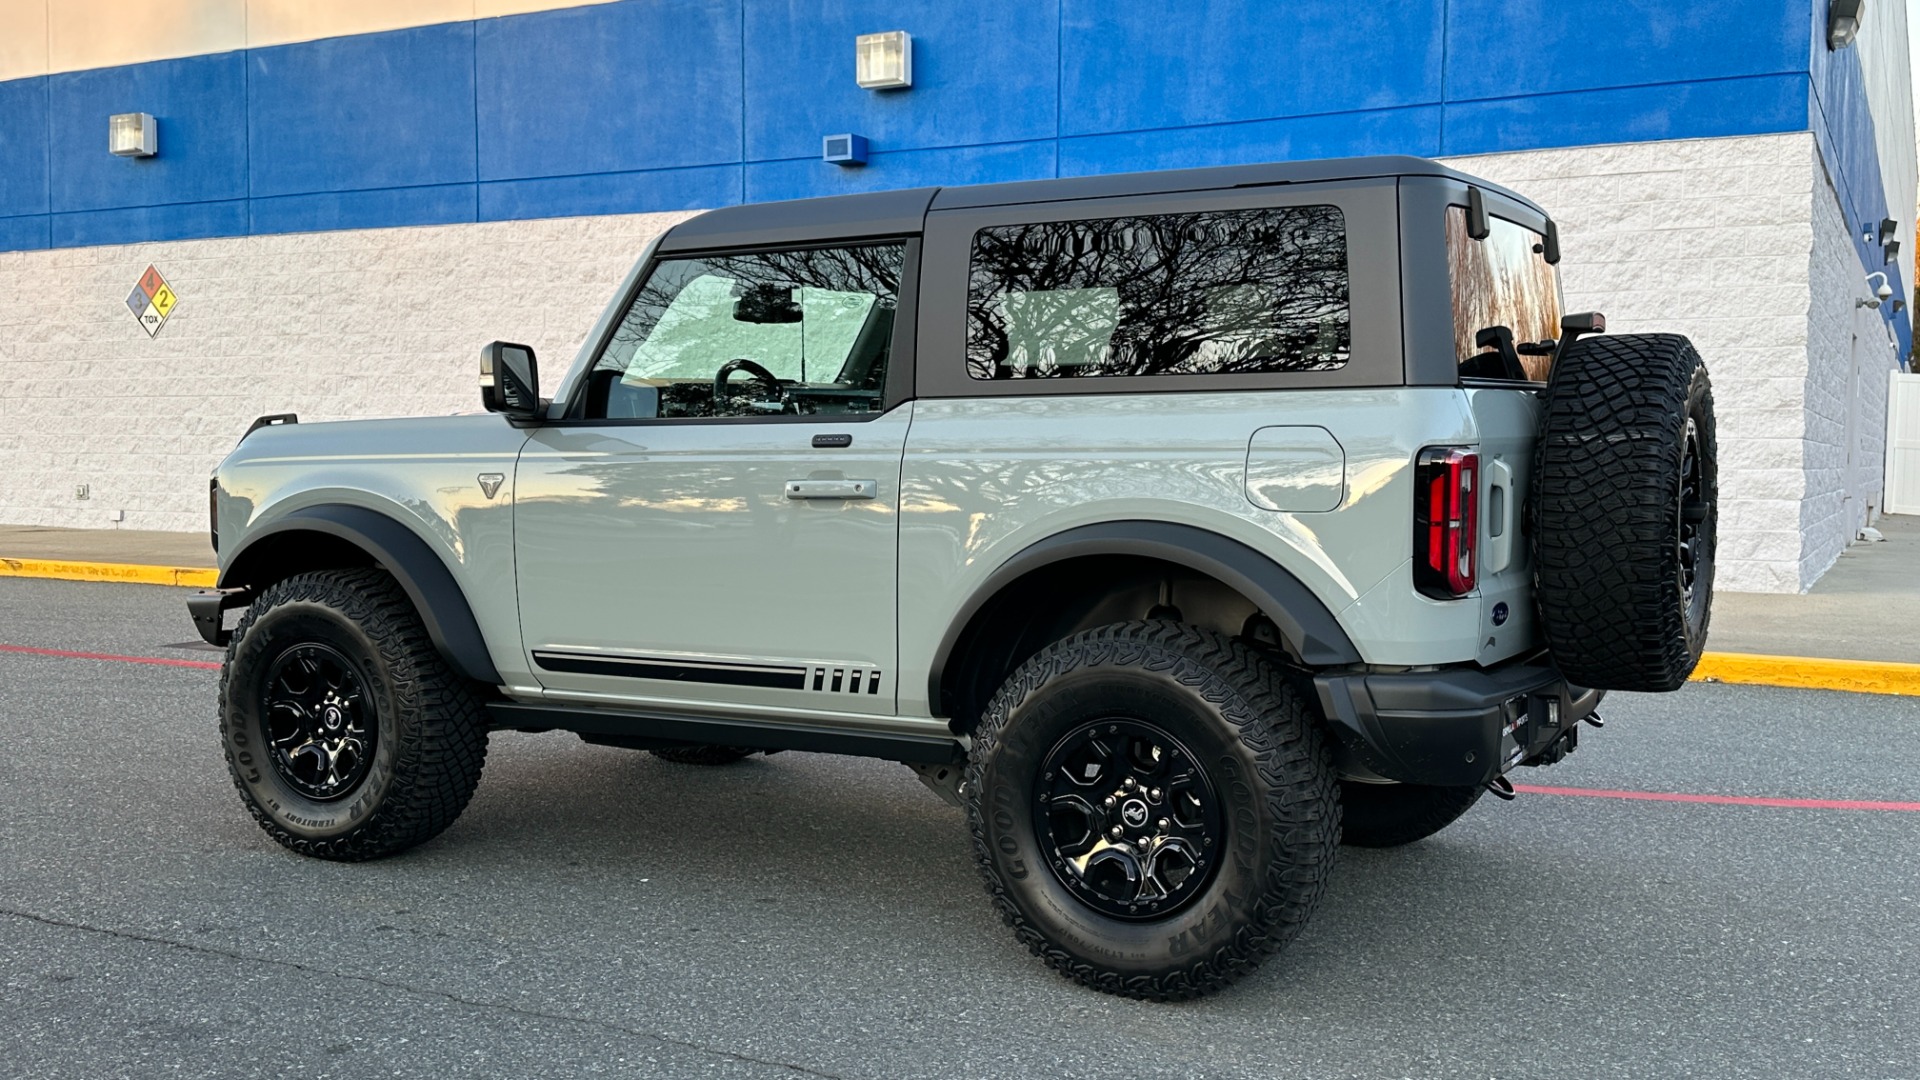 Used 2021 Ford Bronco FIREST EDITION S/N 26 / LEATHER / SASQUATCH / BULLBAR / HARD TOP for sale $76,000 at Formula Imports in Charlotte NC 28227 3